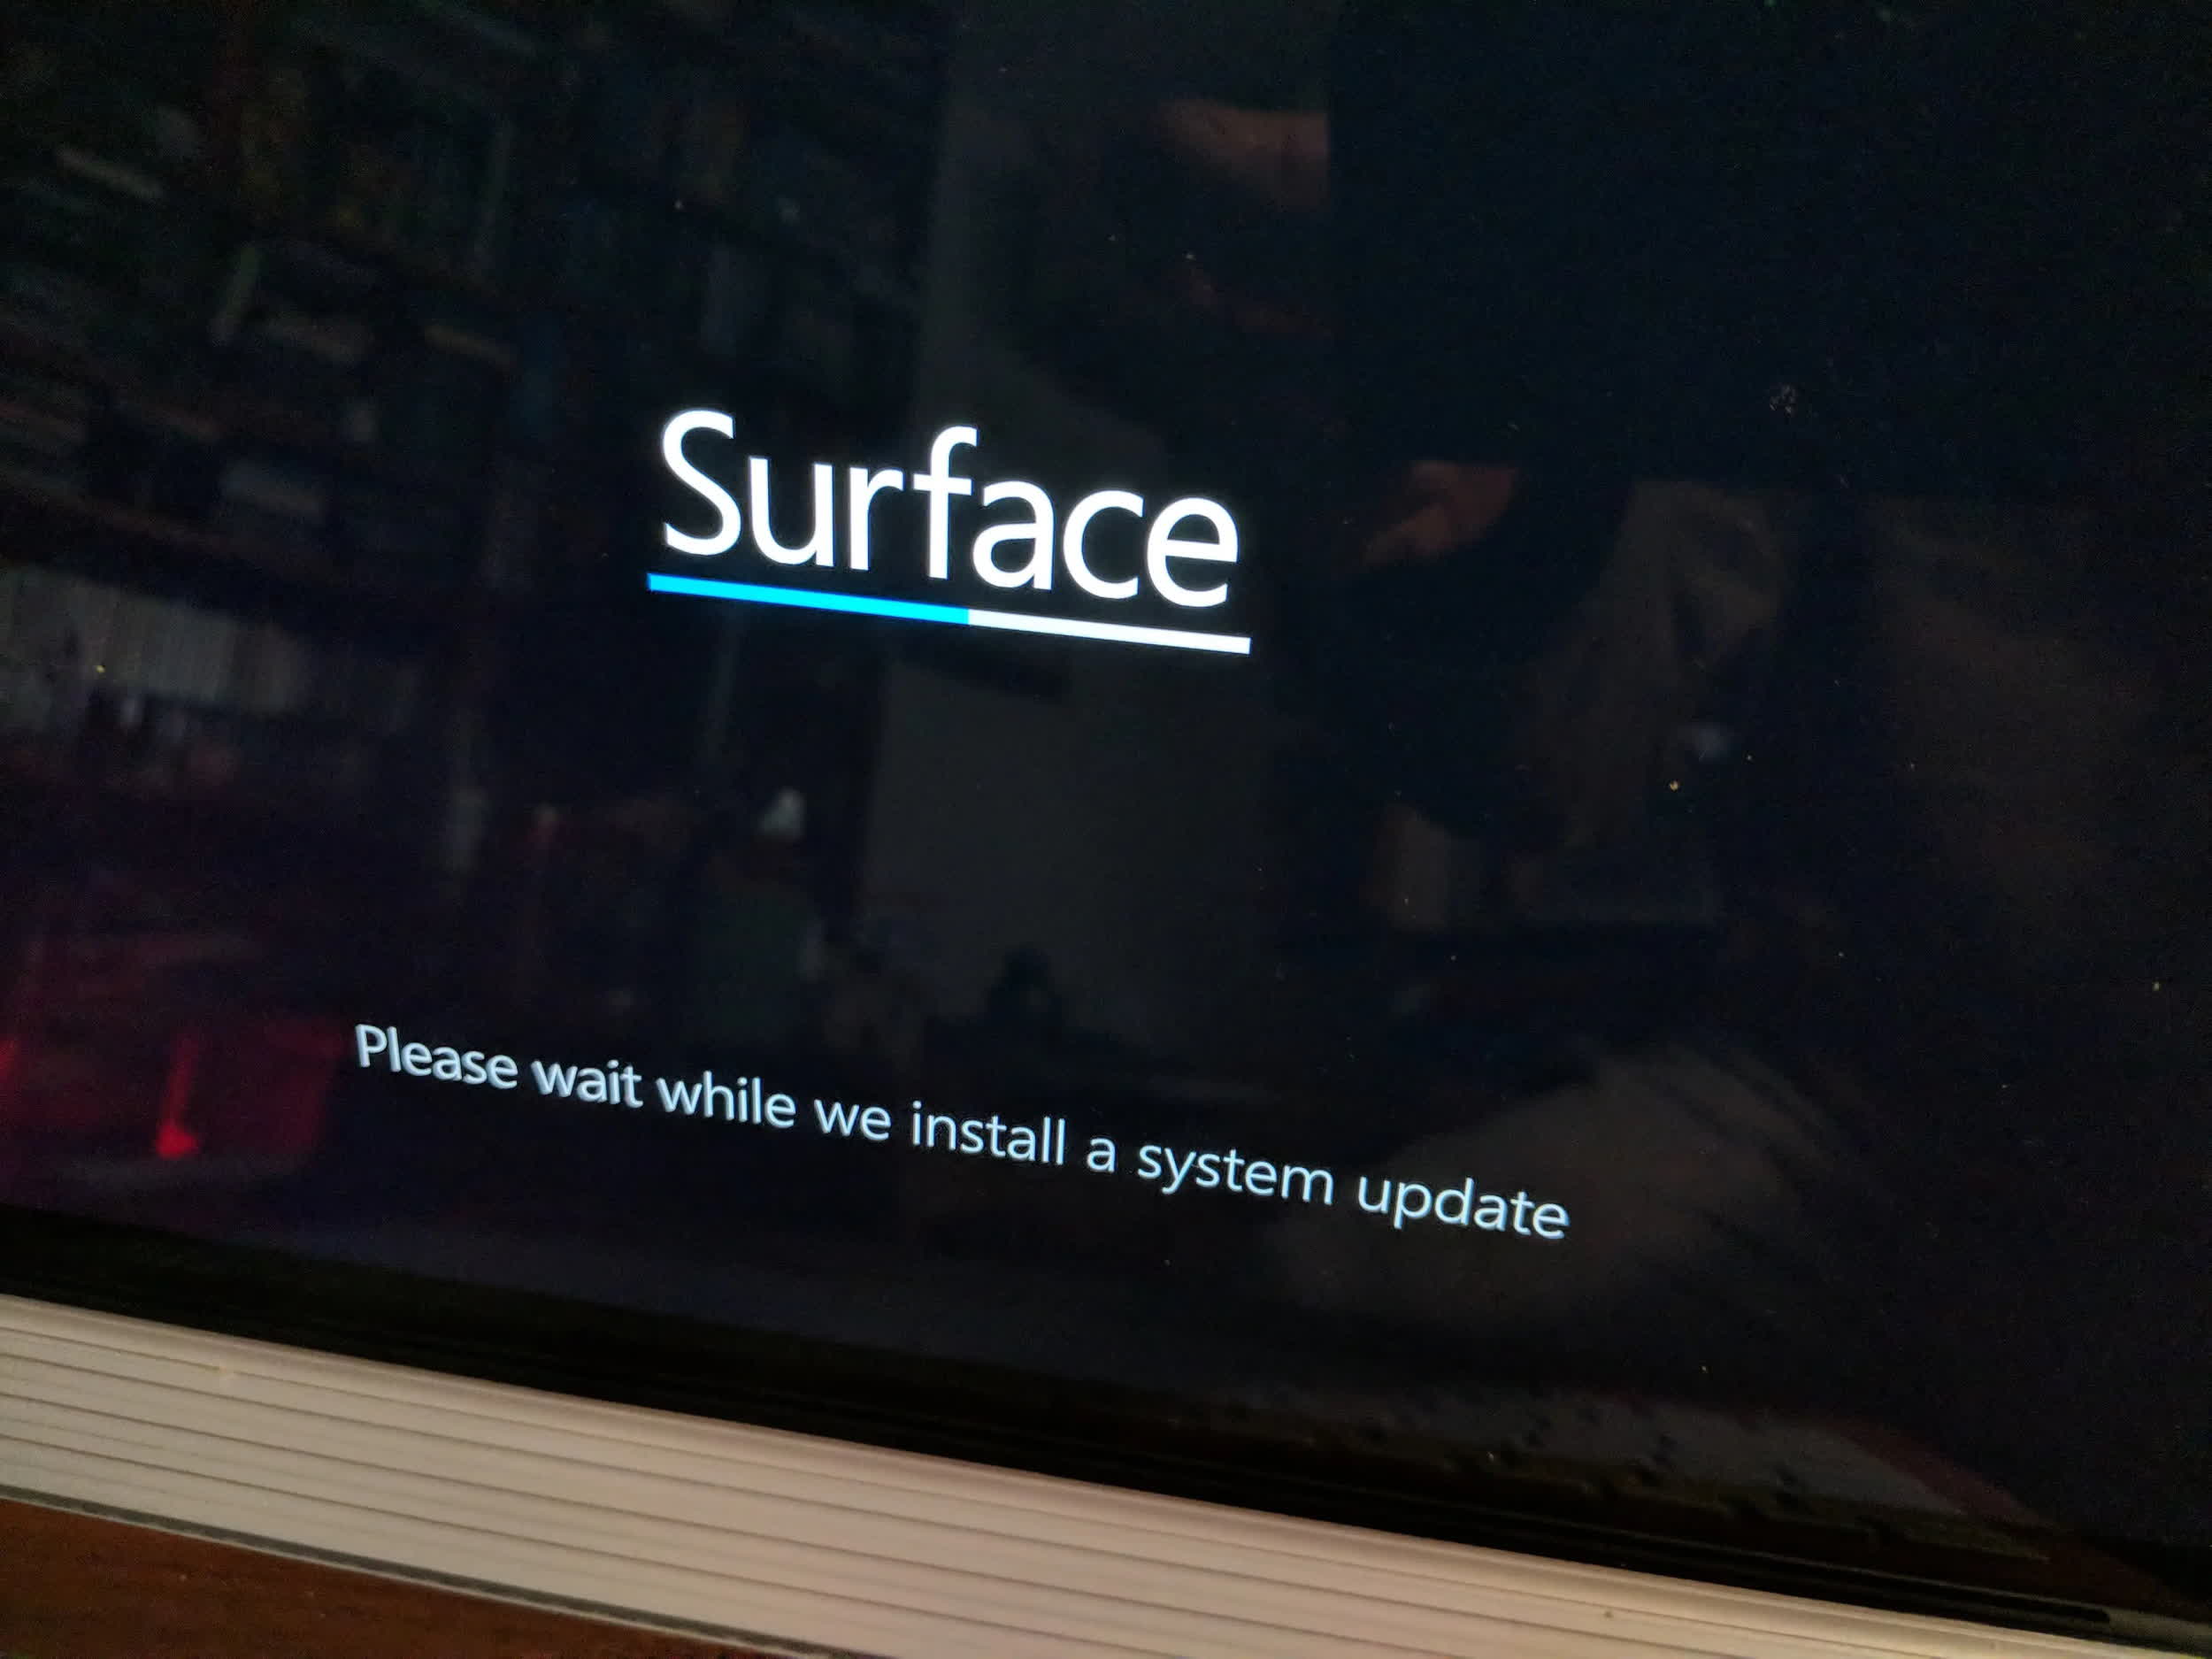 Microsoft releases new firmware update for Surface devices